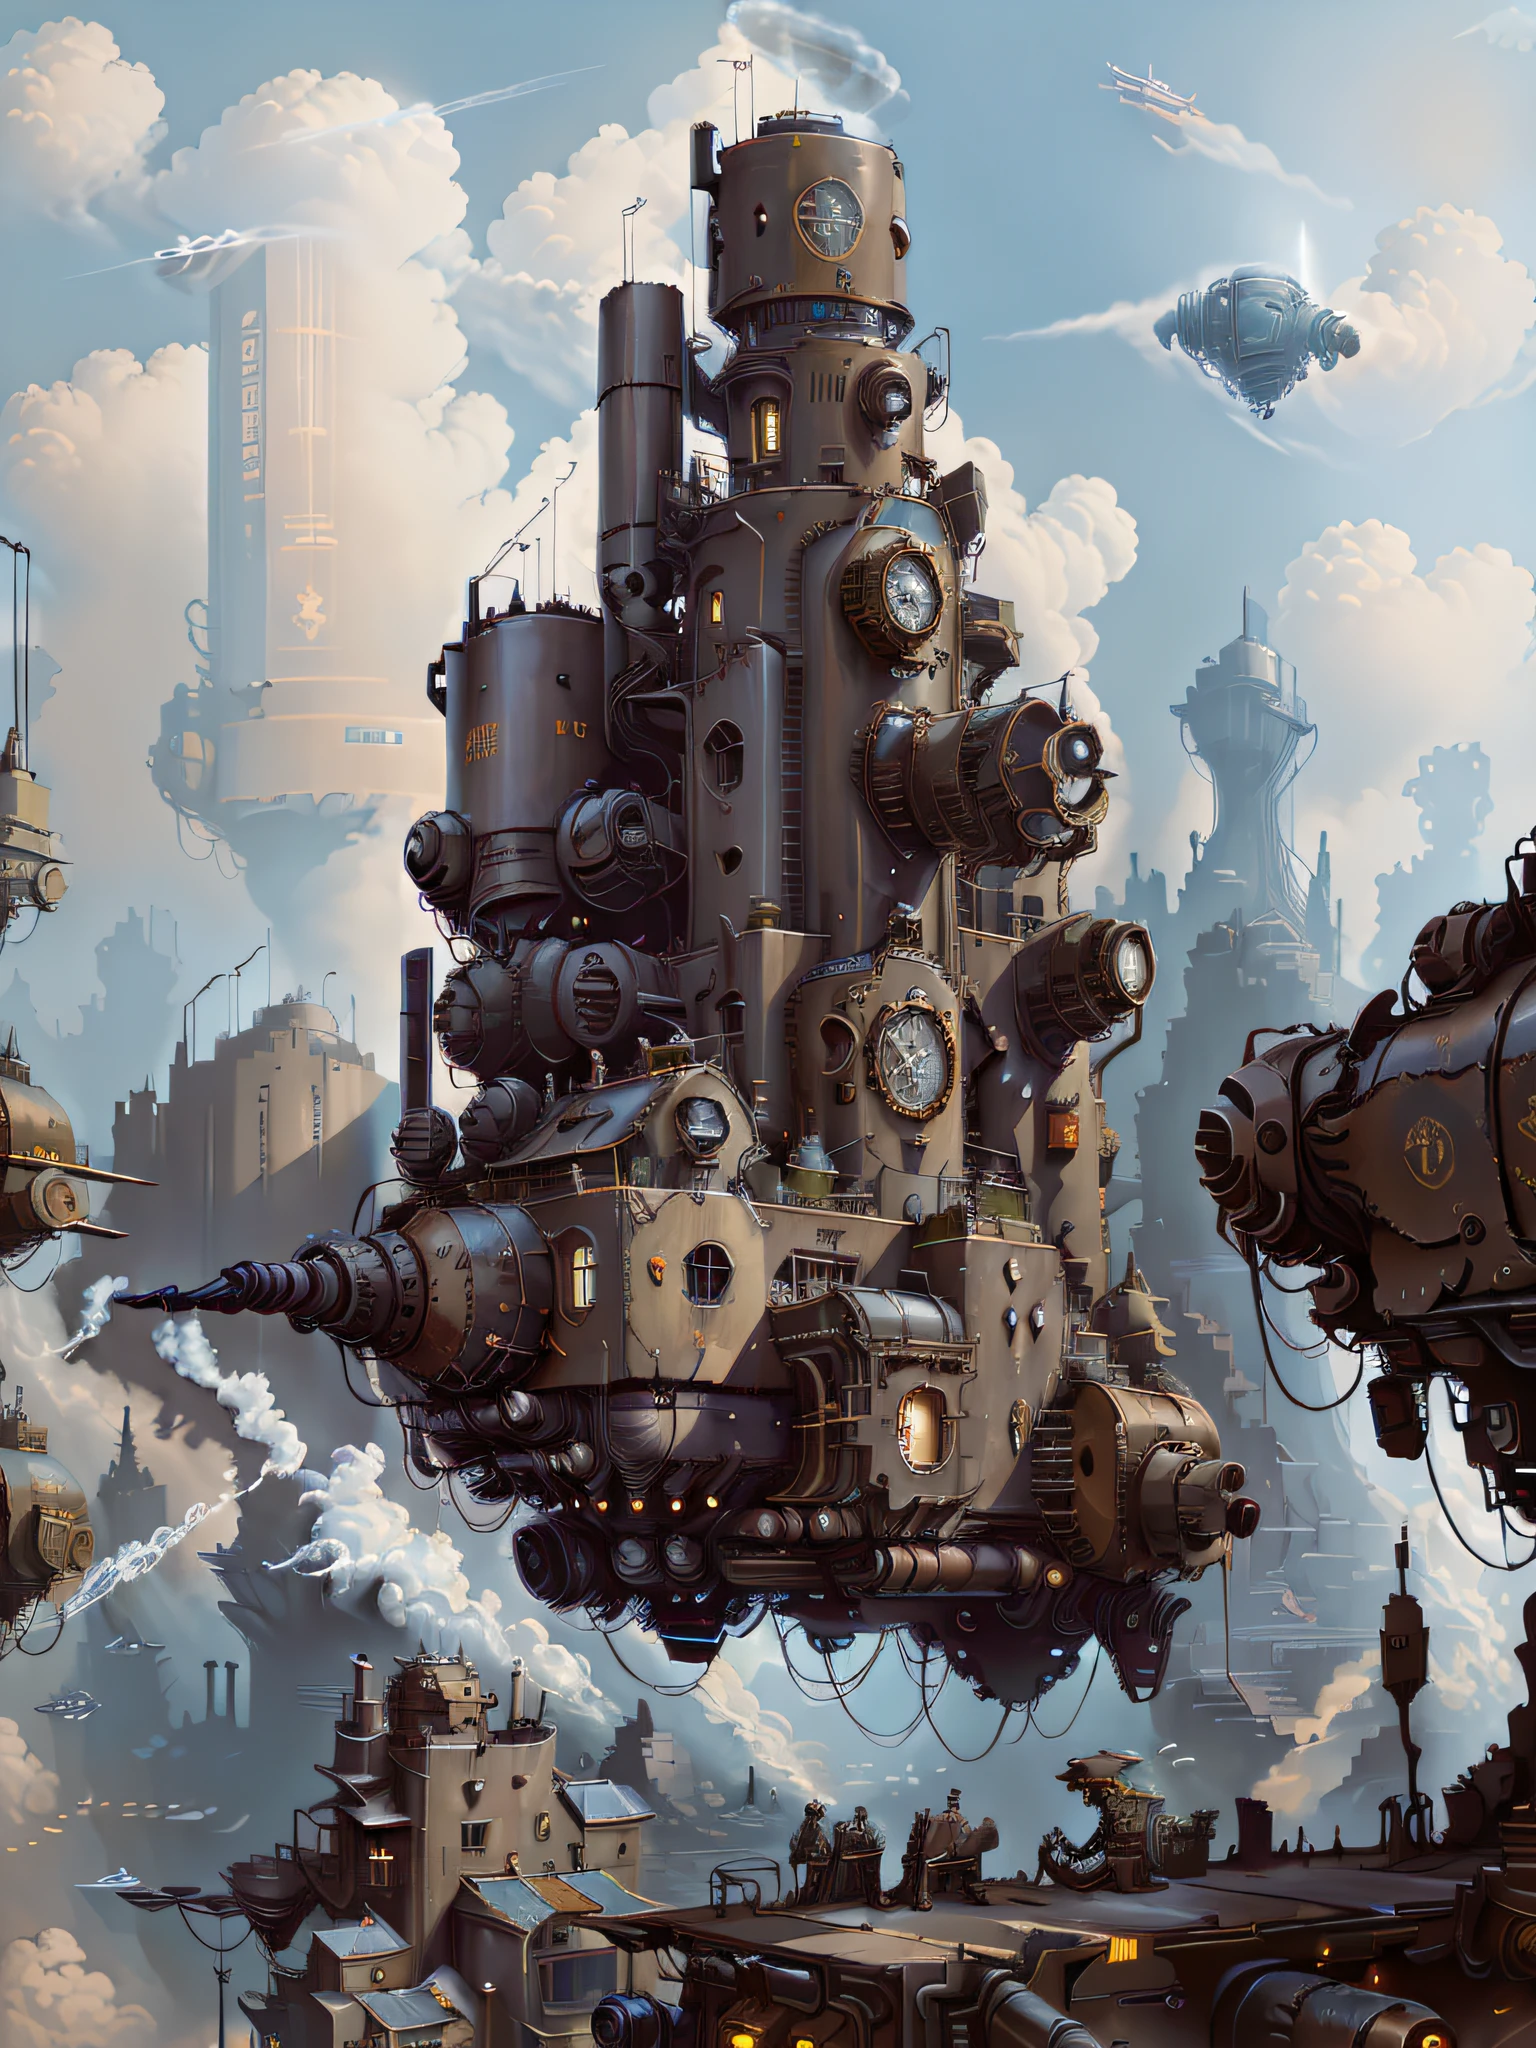 there are many different types of buildings in this picture, in steampunk cityscape, flying cloud castle, a steampunk city, steampunk concept art, steampunk villages castles, victorian steampunk mega city, steampunk city, inspired by Ian McQue, very far royal steampunk castle, steampunk city background, ancient steampunk city, detailed digital concept art, flying ships in the background